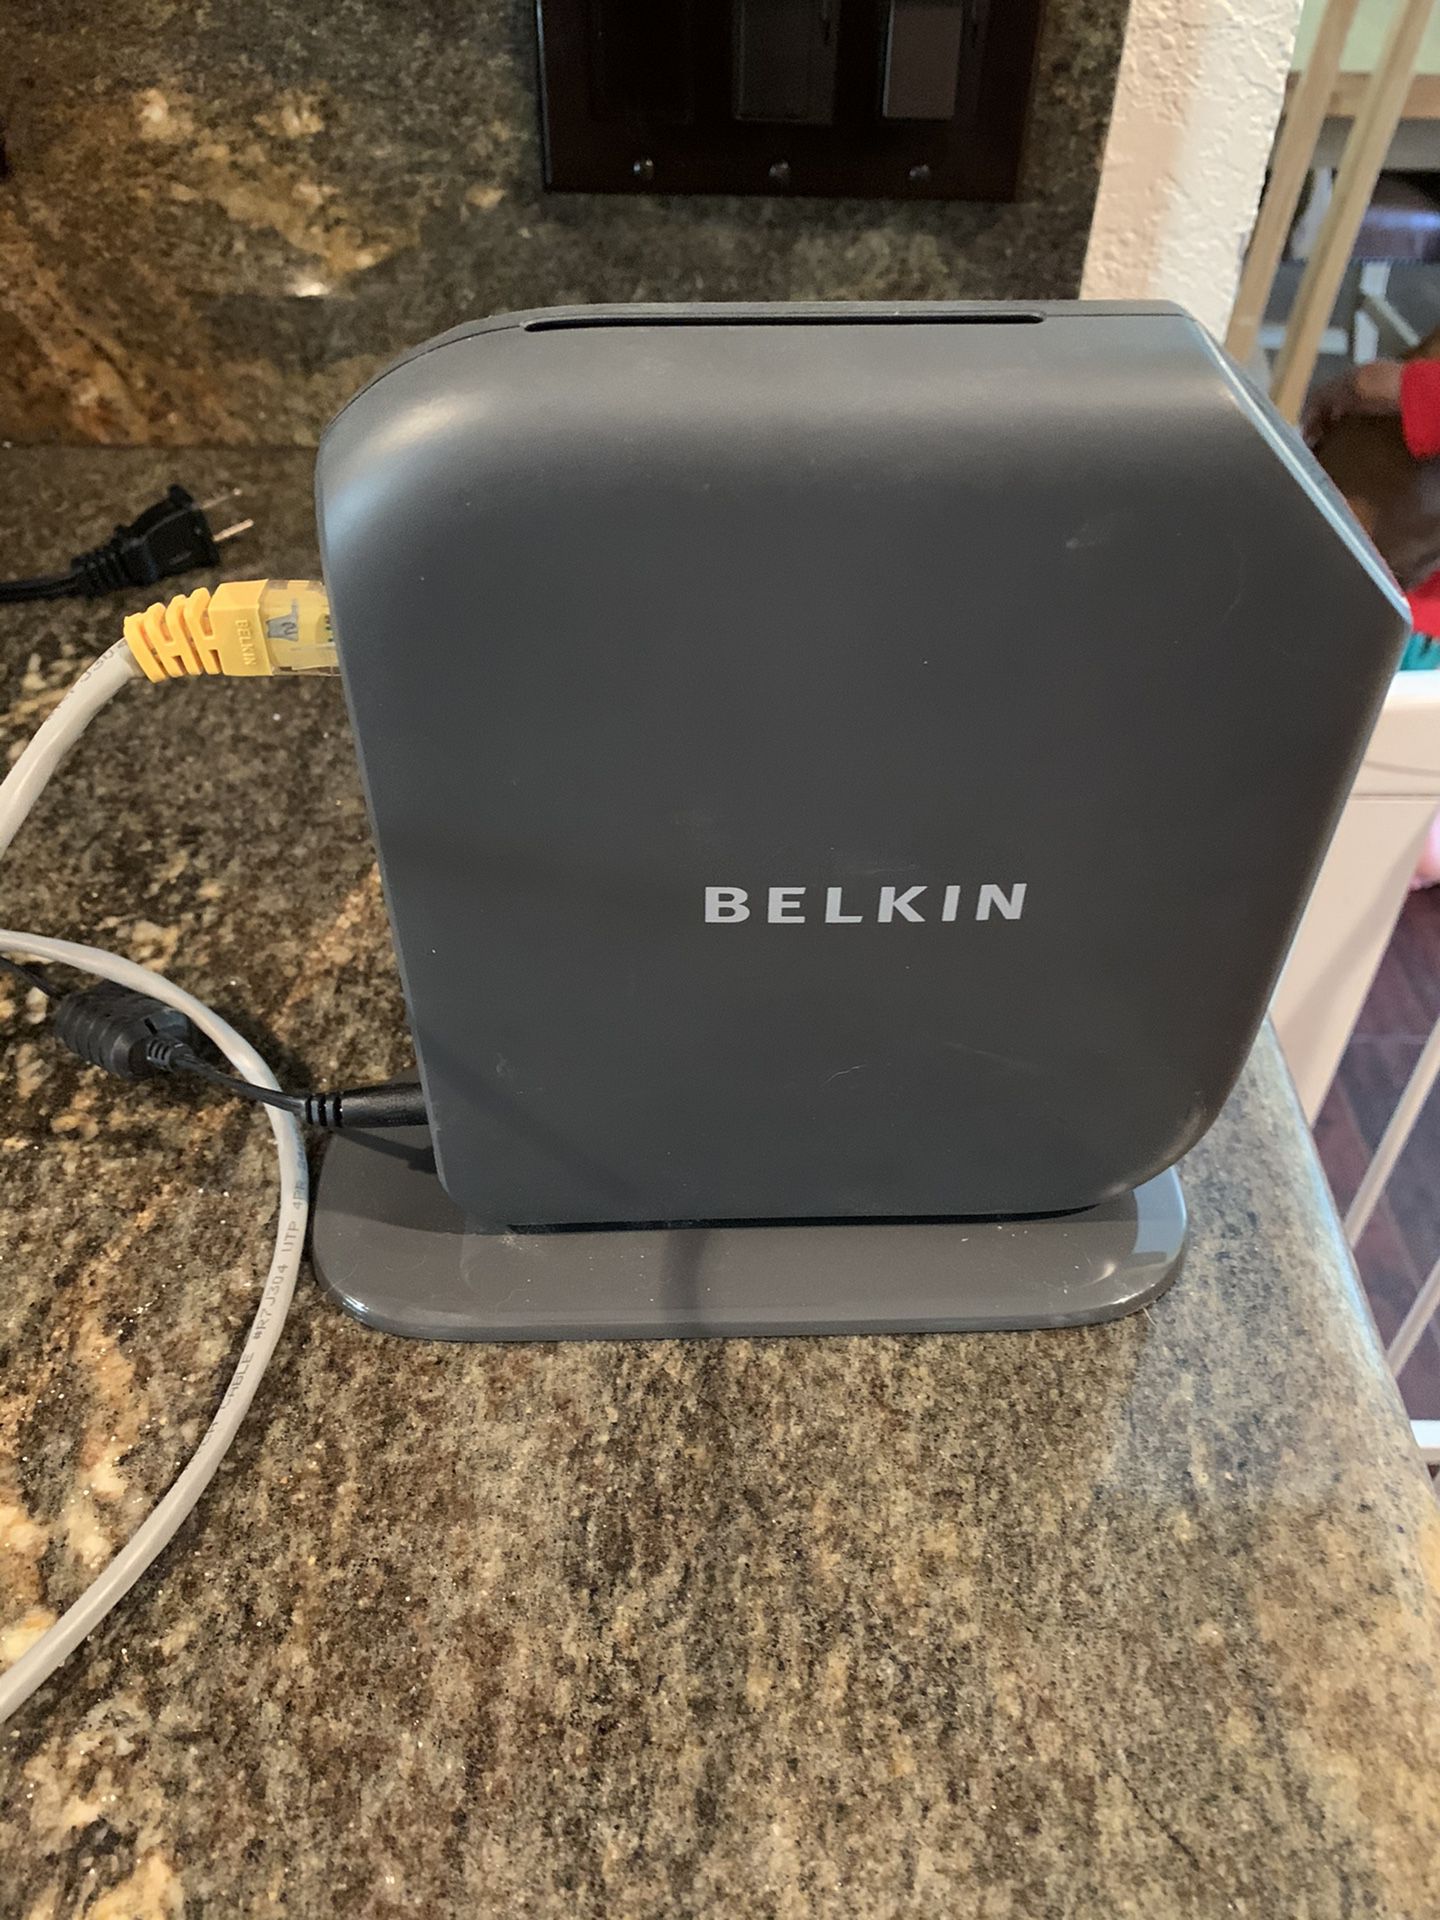 Belkin Play N600 HD wireless router w/Ethernet cable